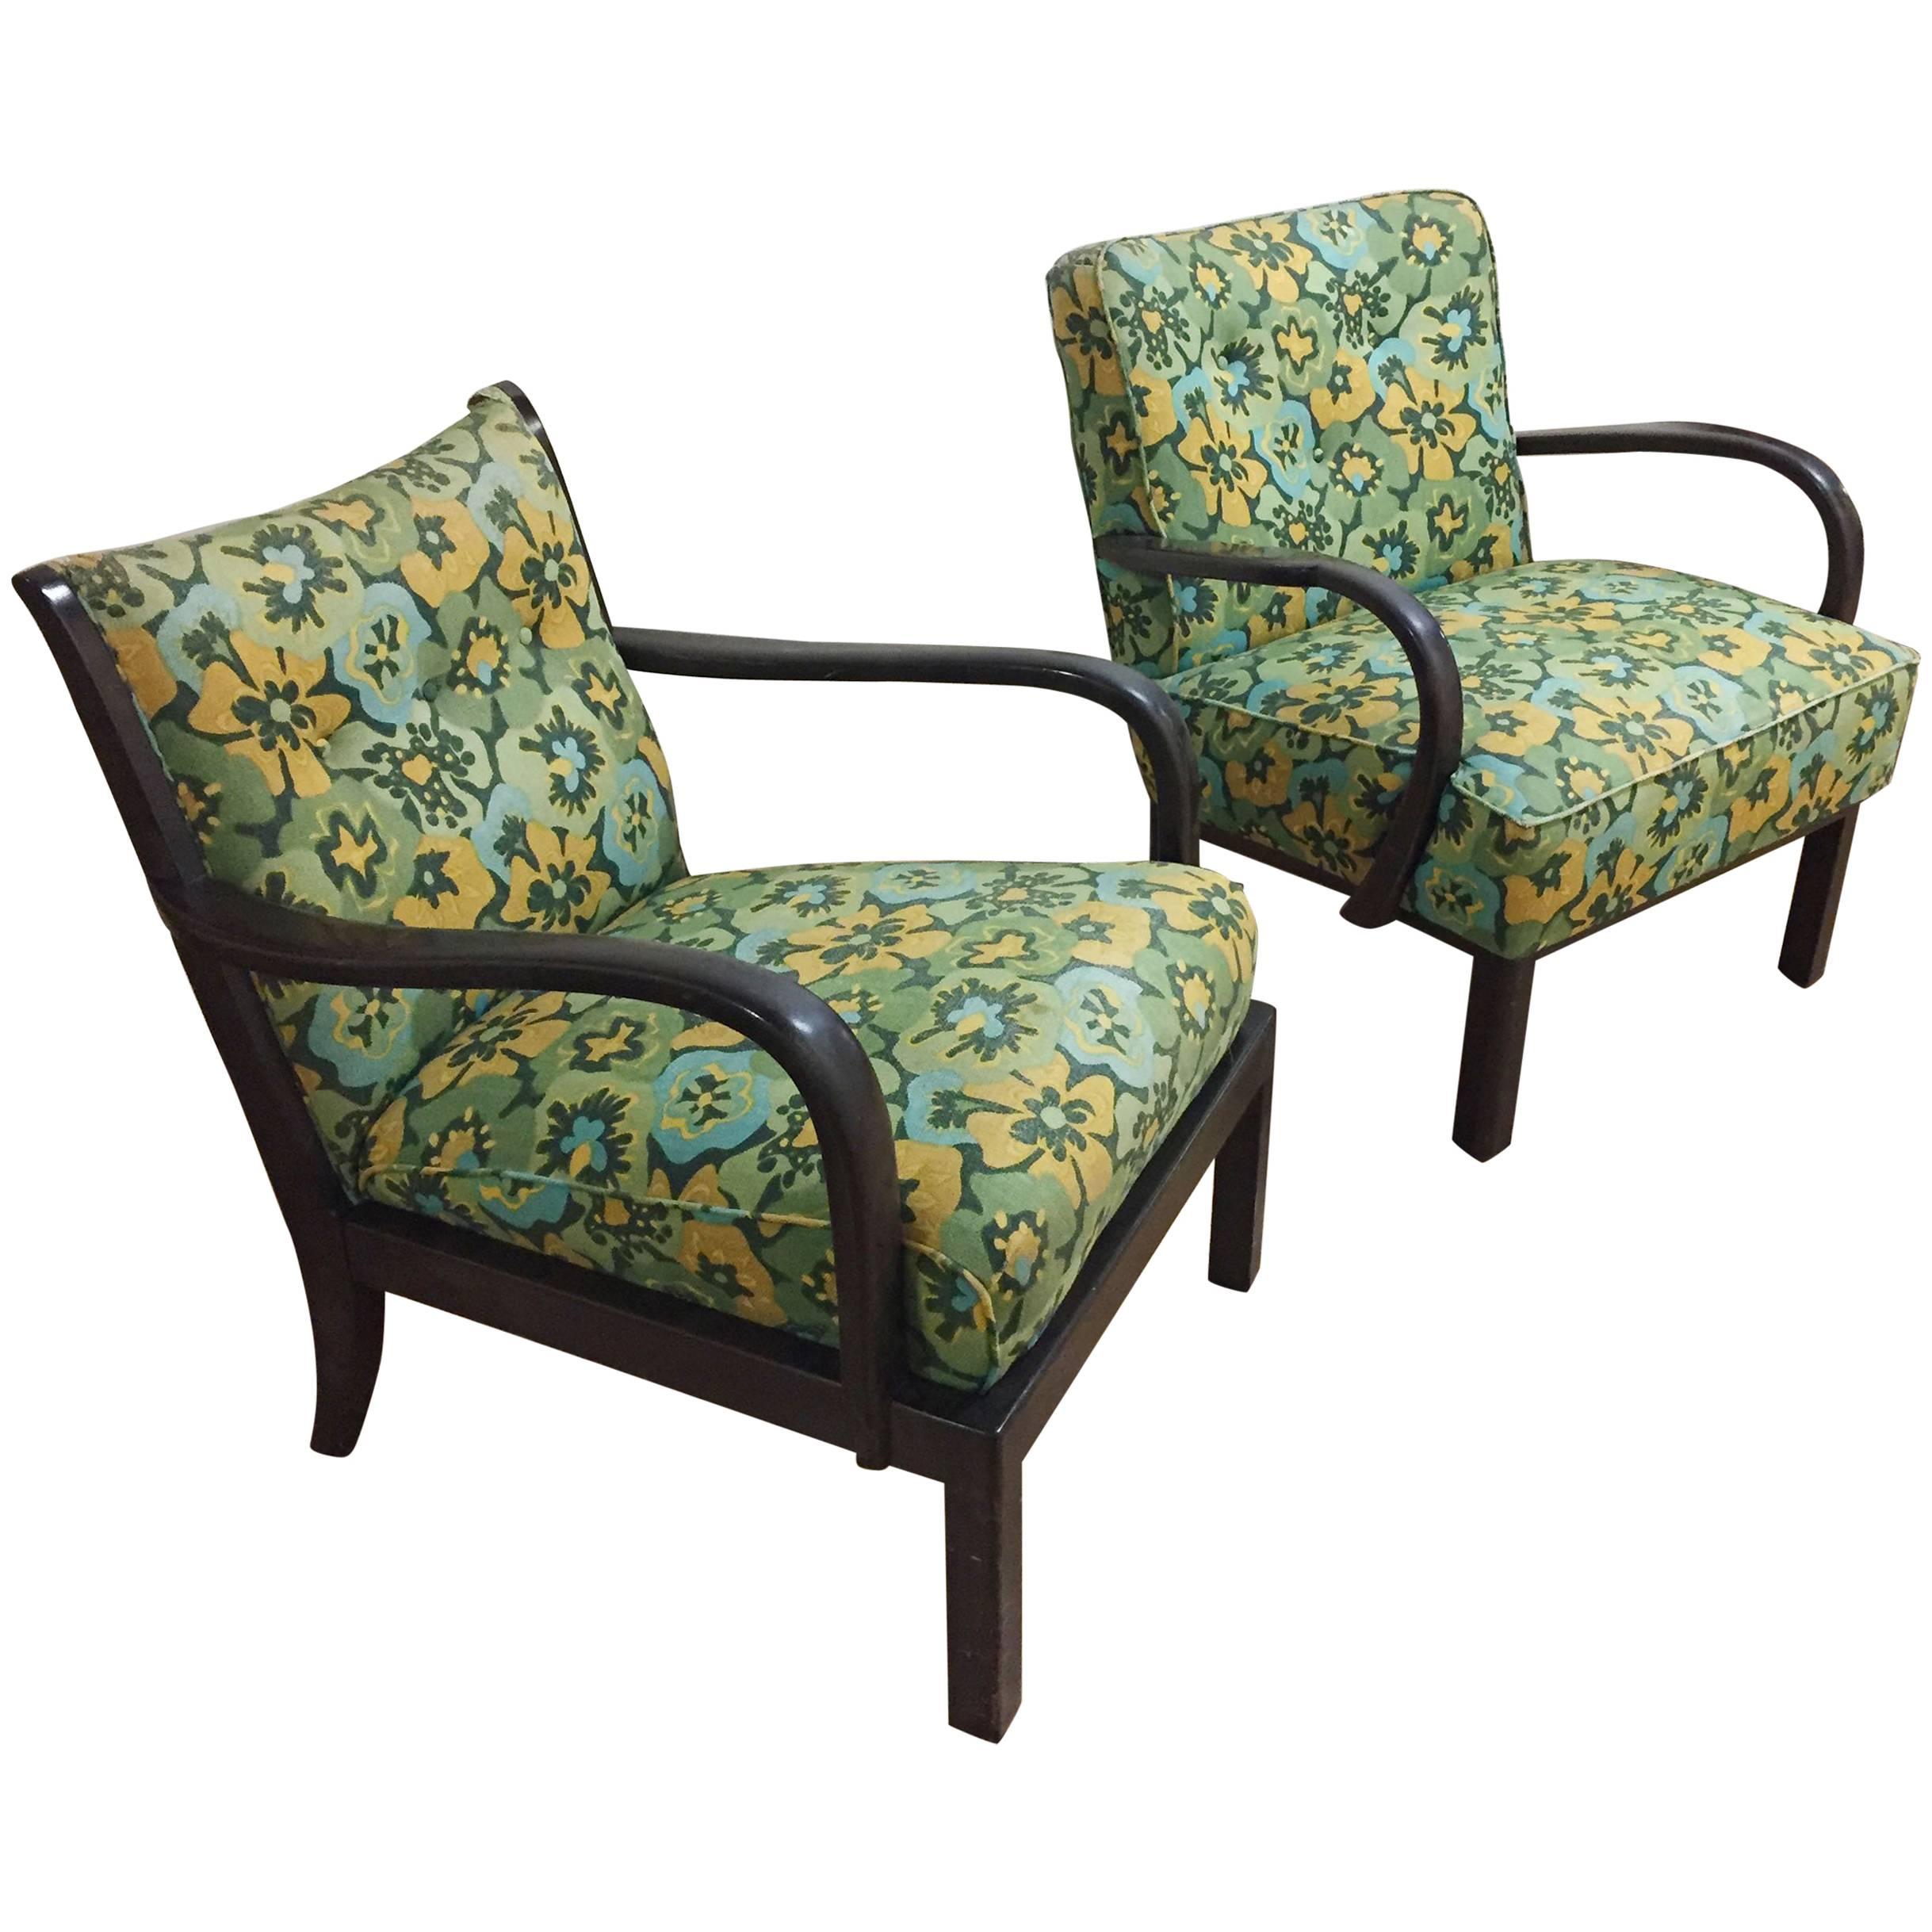 Great pair of vintage Mid-Century Modern lounge chairs in the manner of Edward Wormley for Dunbar, Paul Laszlo and MIlo Baughman. No tags. Fabric is original and just spectacular. There are some condition issues with the fabric, but it might be able